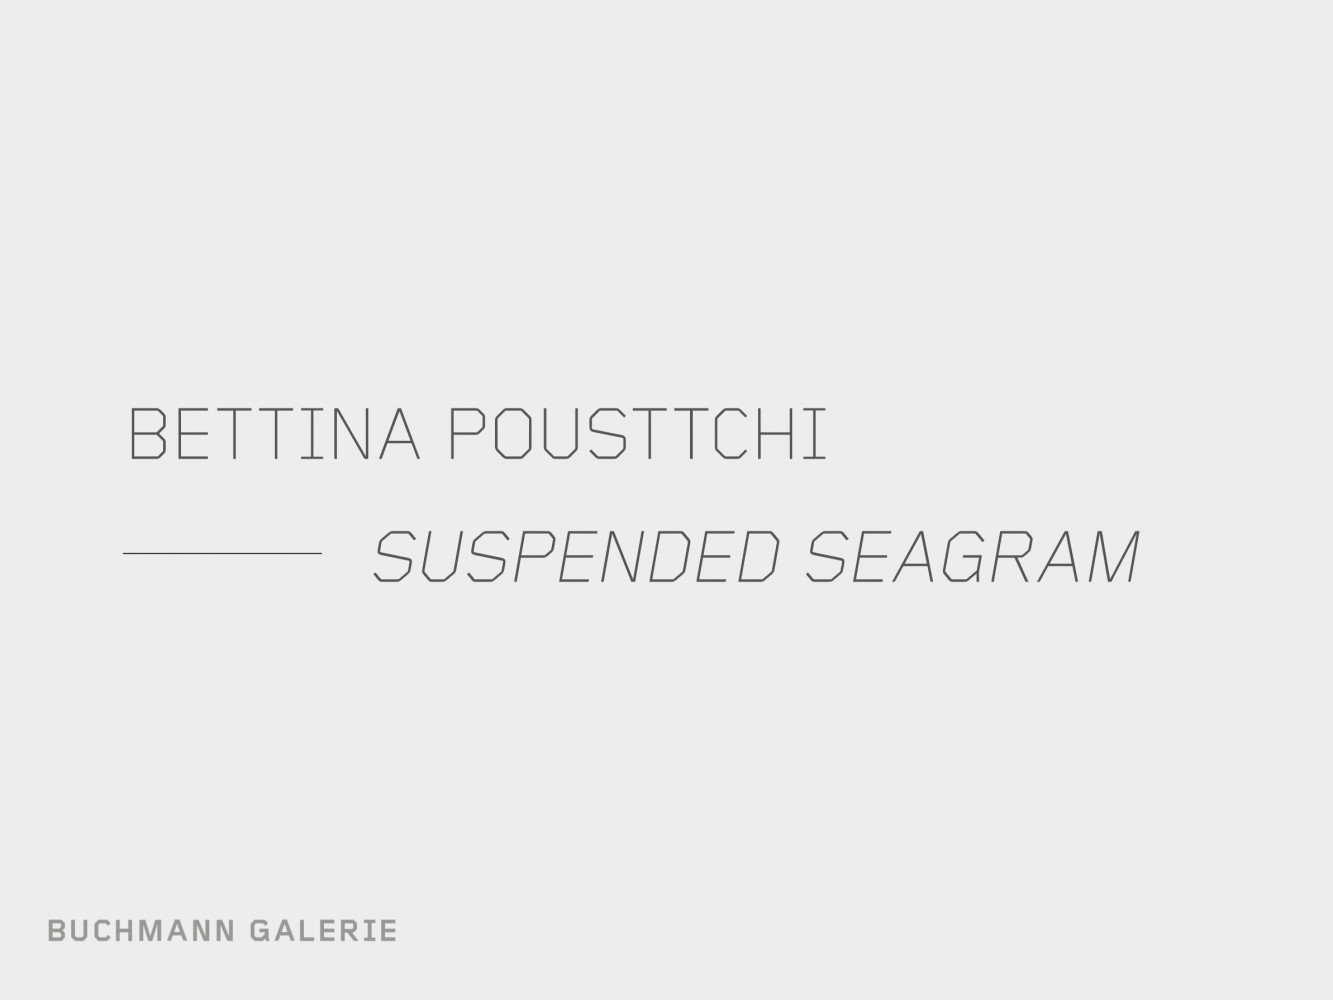 ‘ Bettina Pousttchi – Mies in Mind: Suspended Seagram’